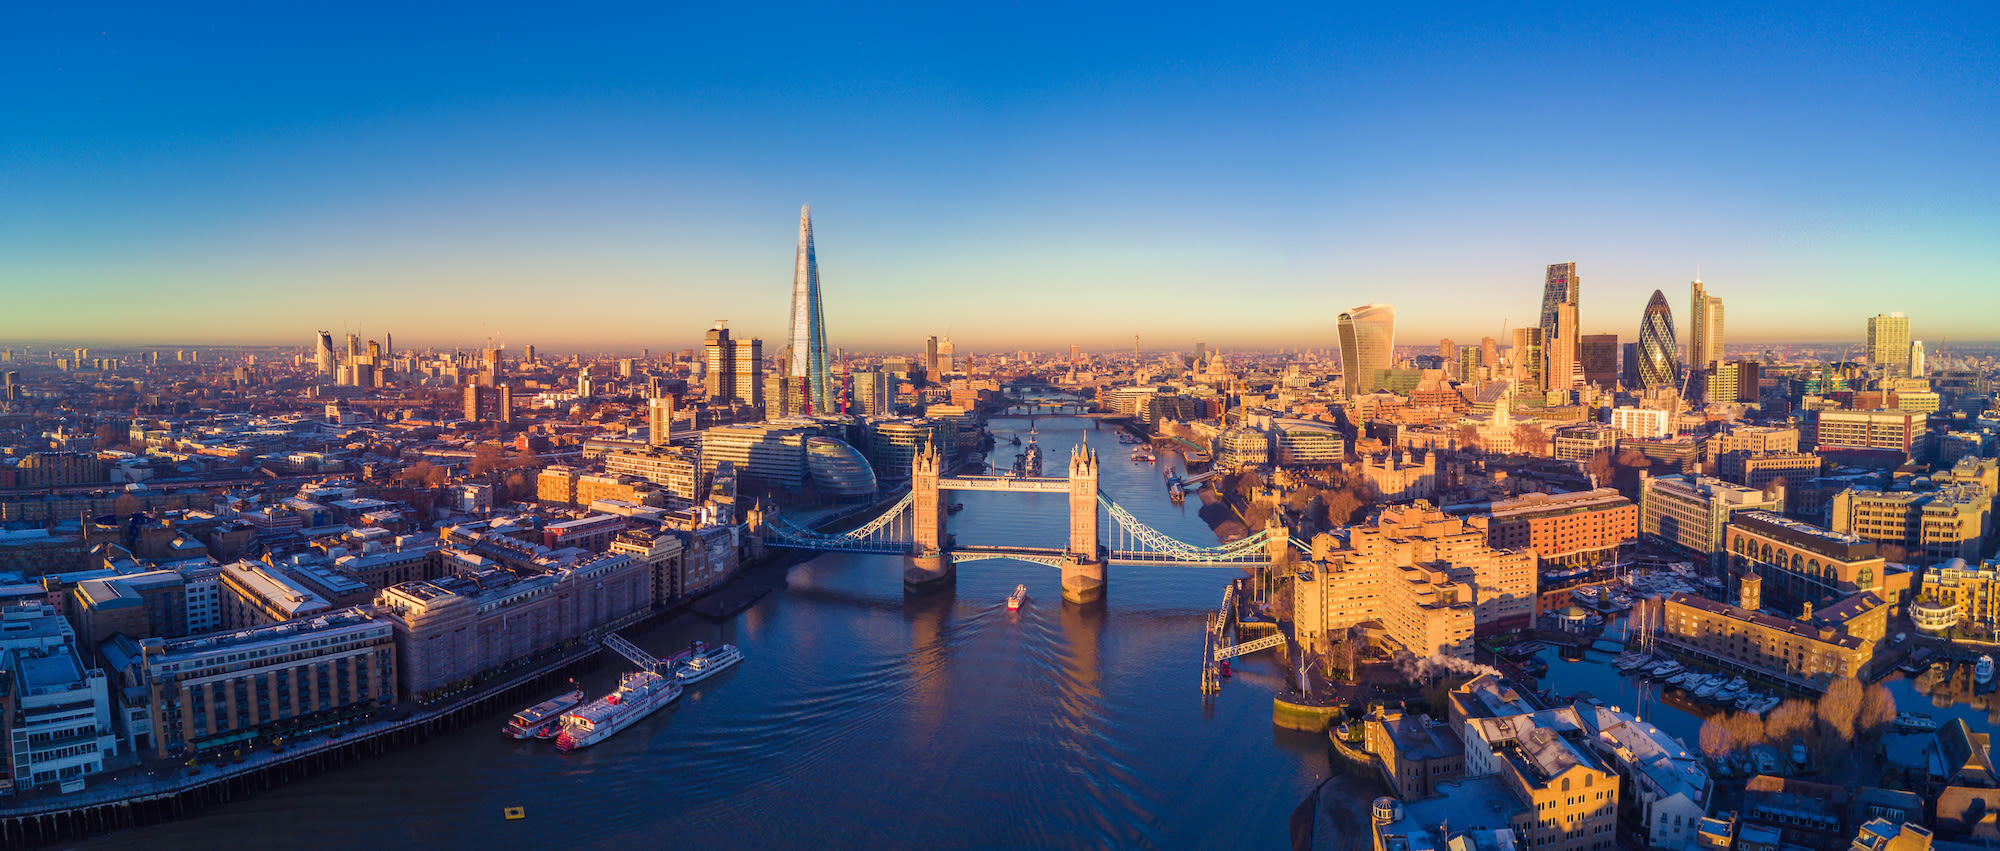 Aerial photo of the Thames including Tower Bridge, the Shard and the City